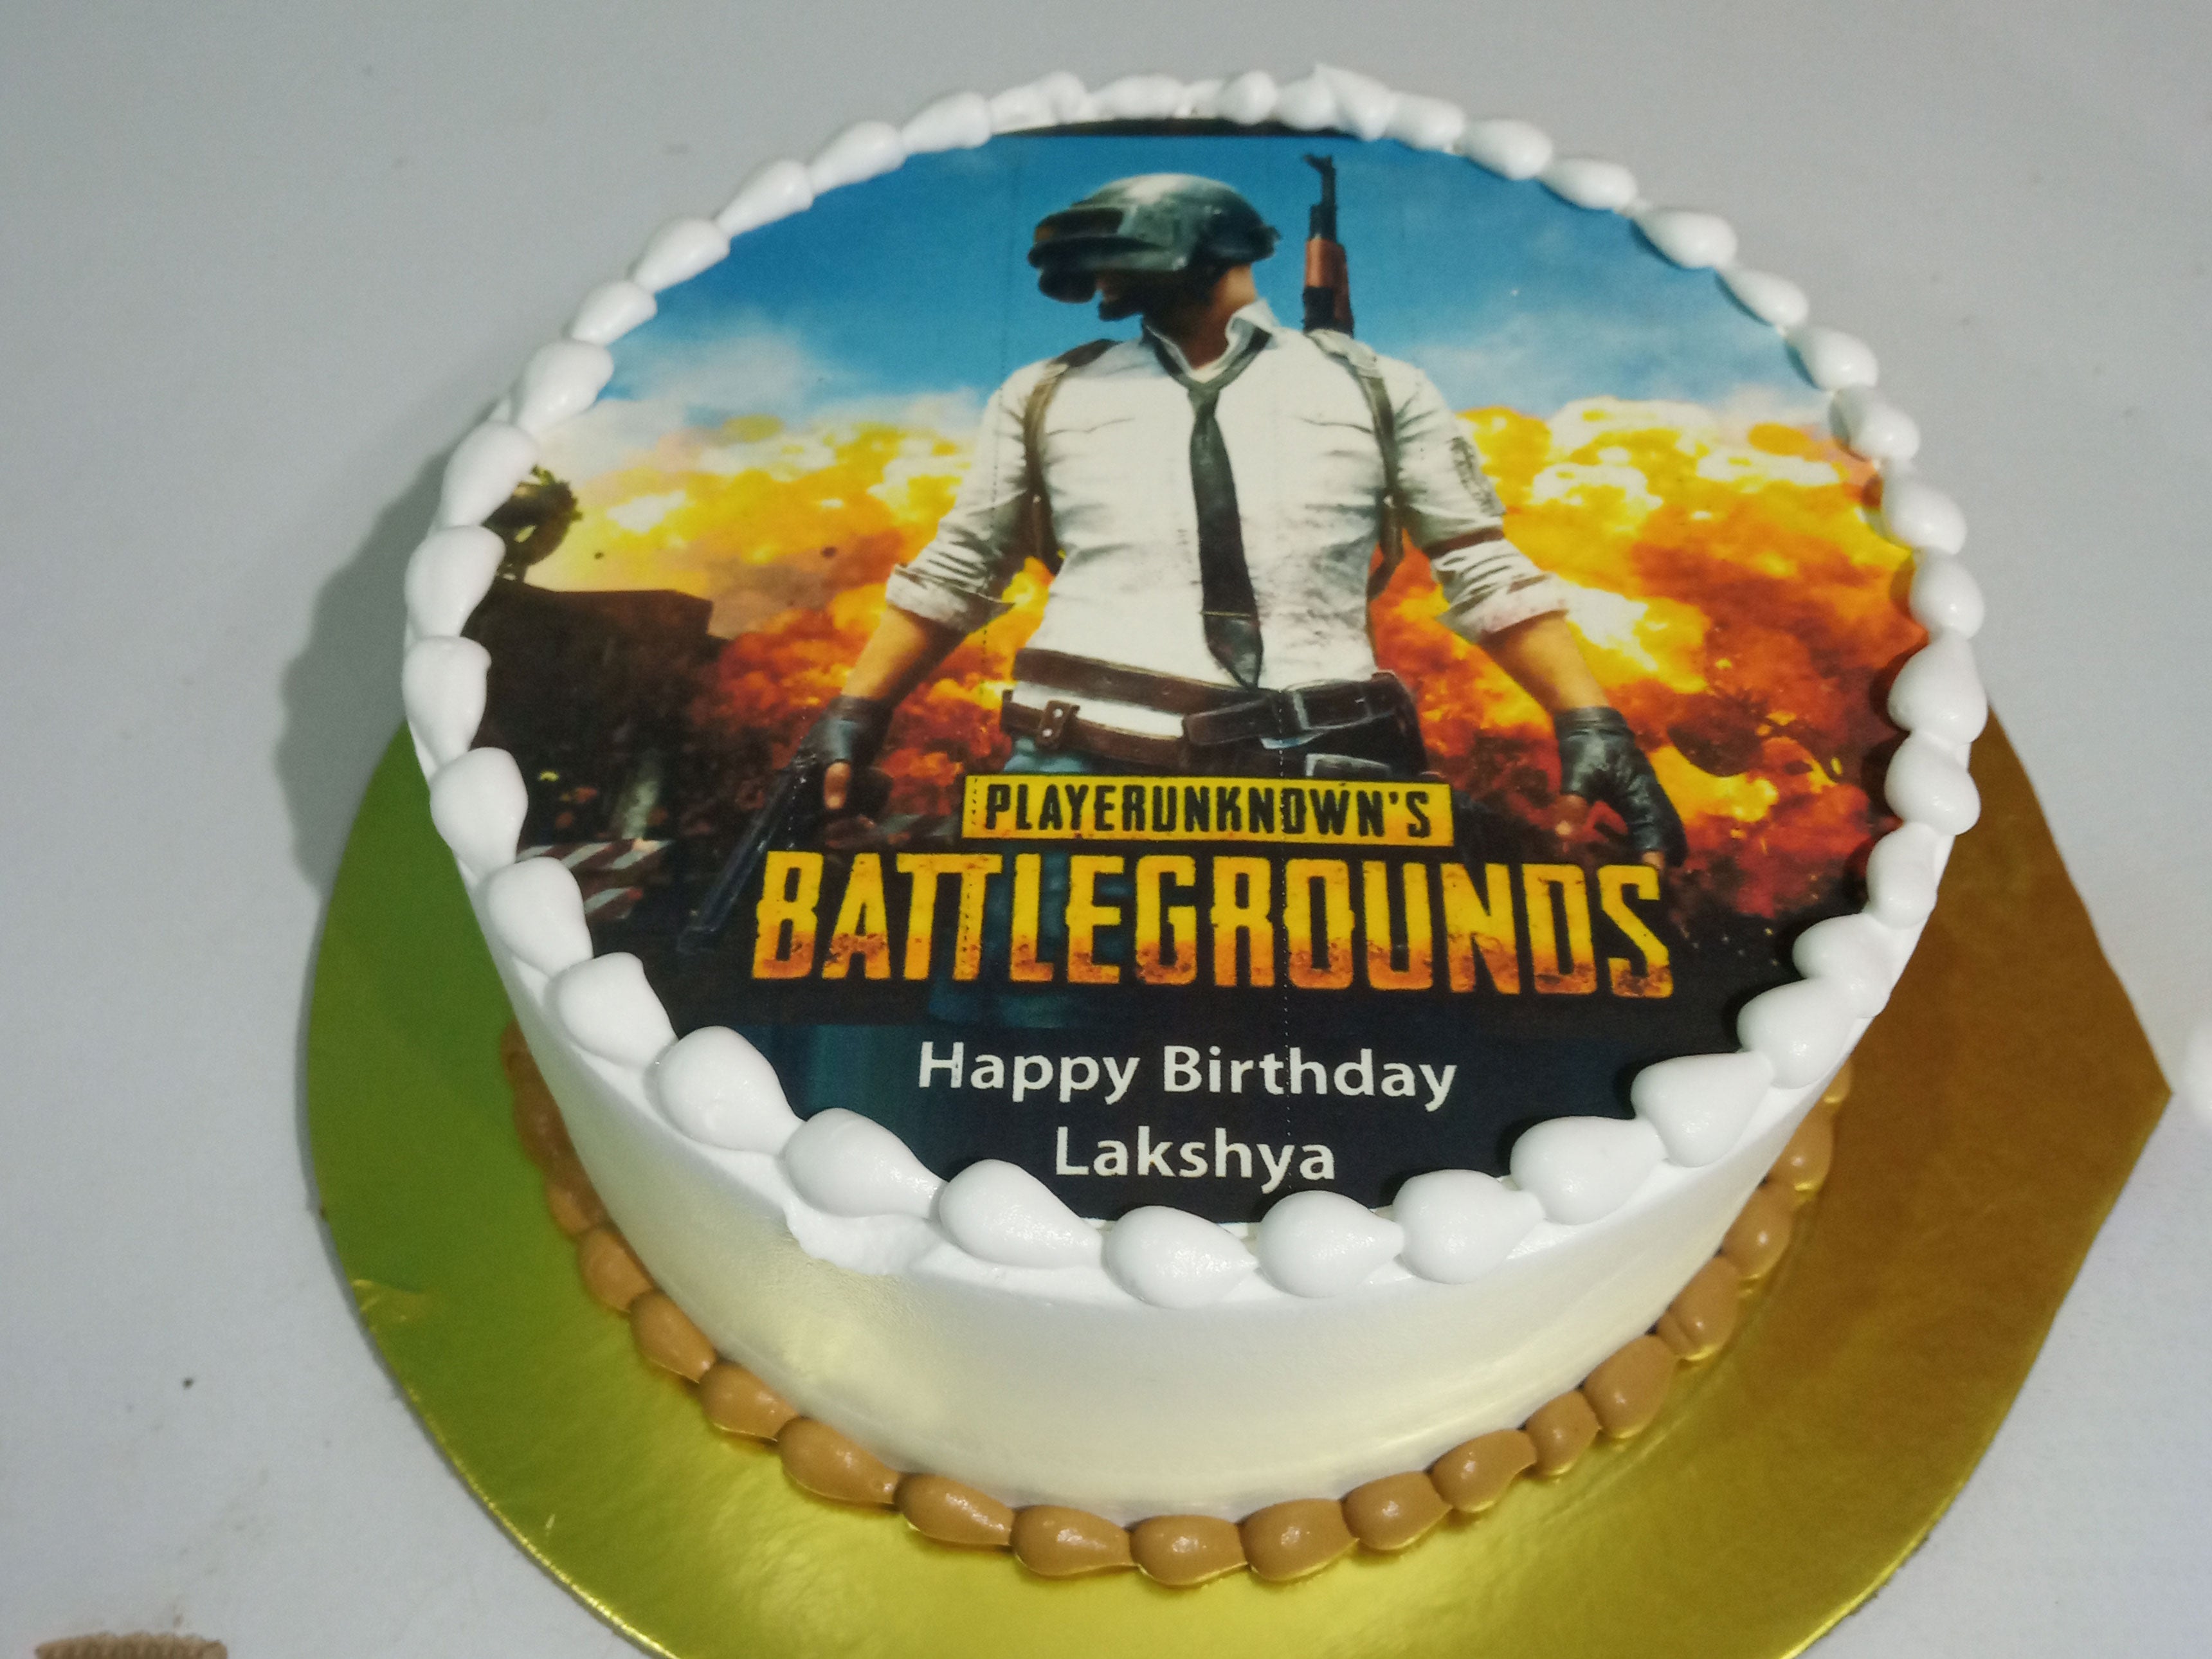 PUBG Chocolate Cake Delivery in Delhi NCR - ₹1,249.00 Cake Express